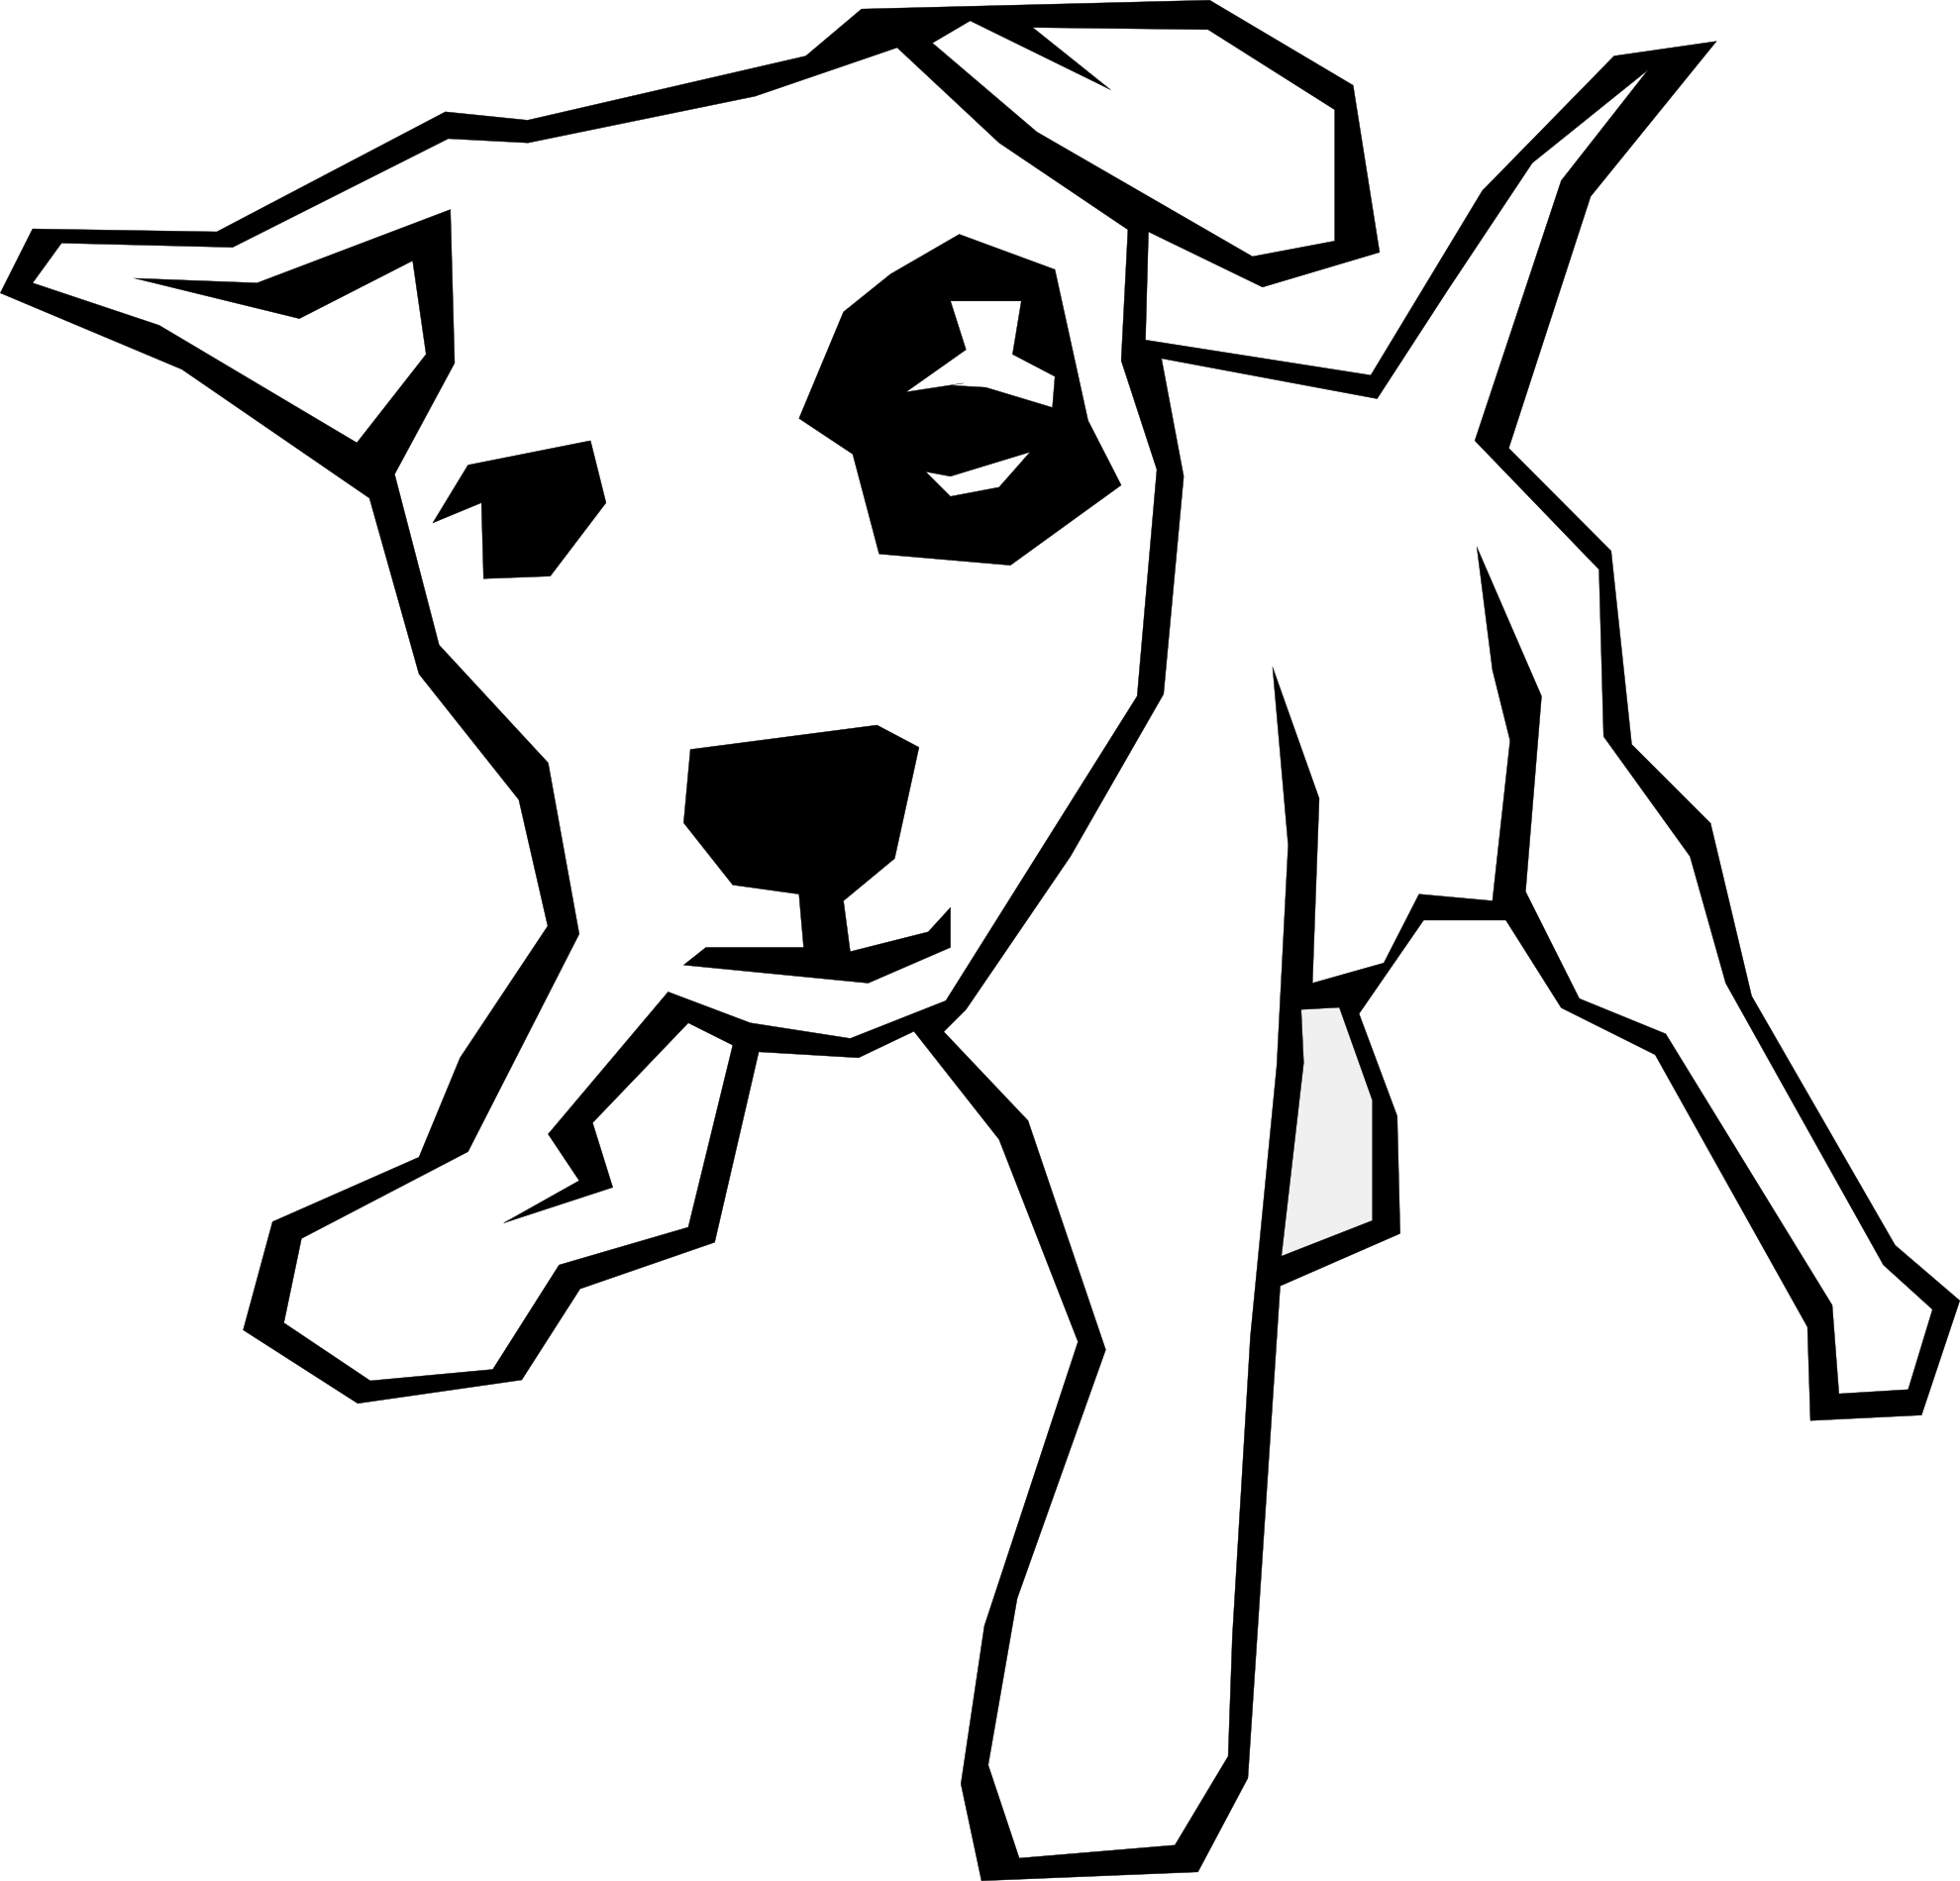 Dog House Clipart Black And White | Clipart Panda - Free Clipart ...